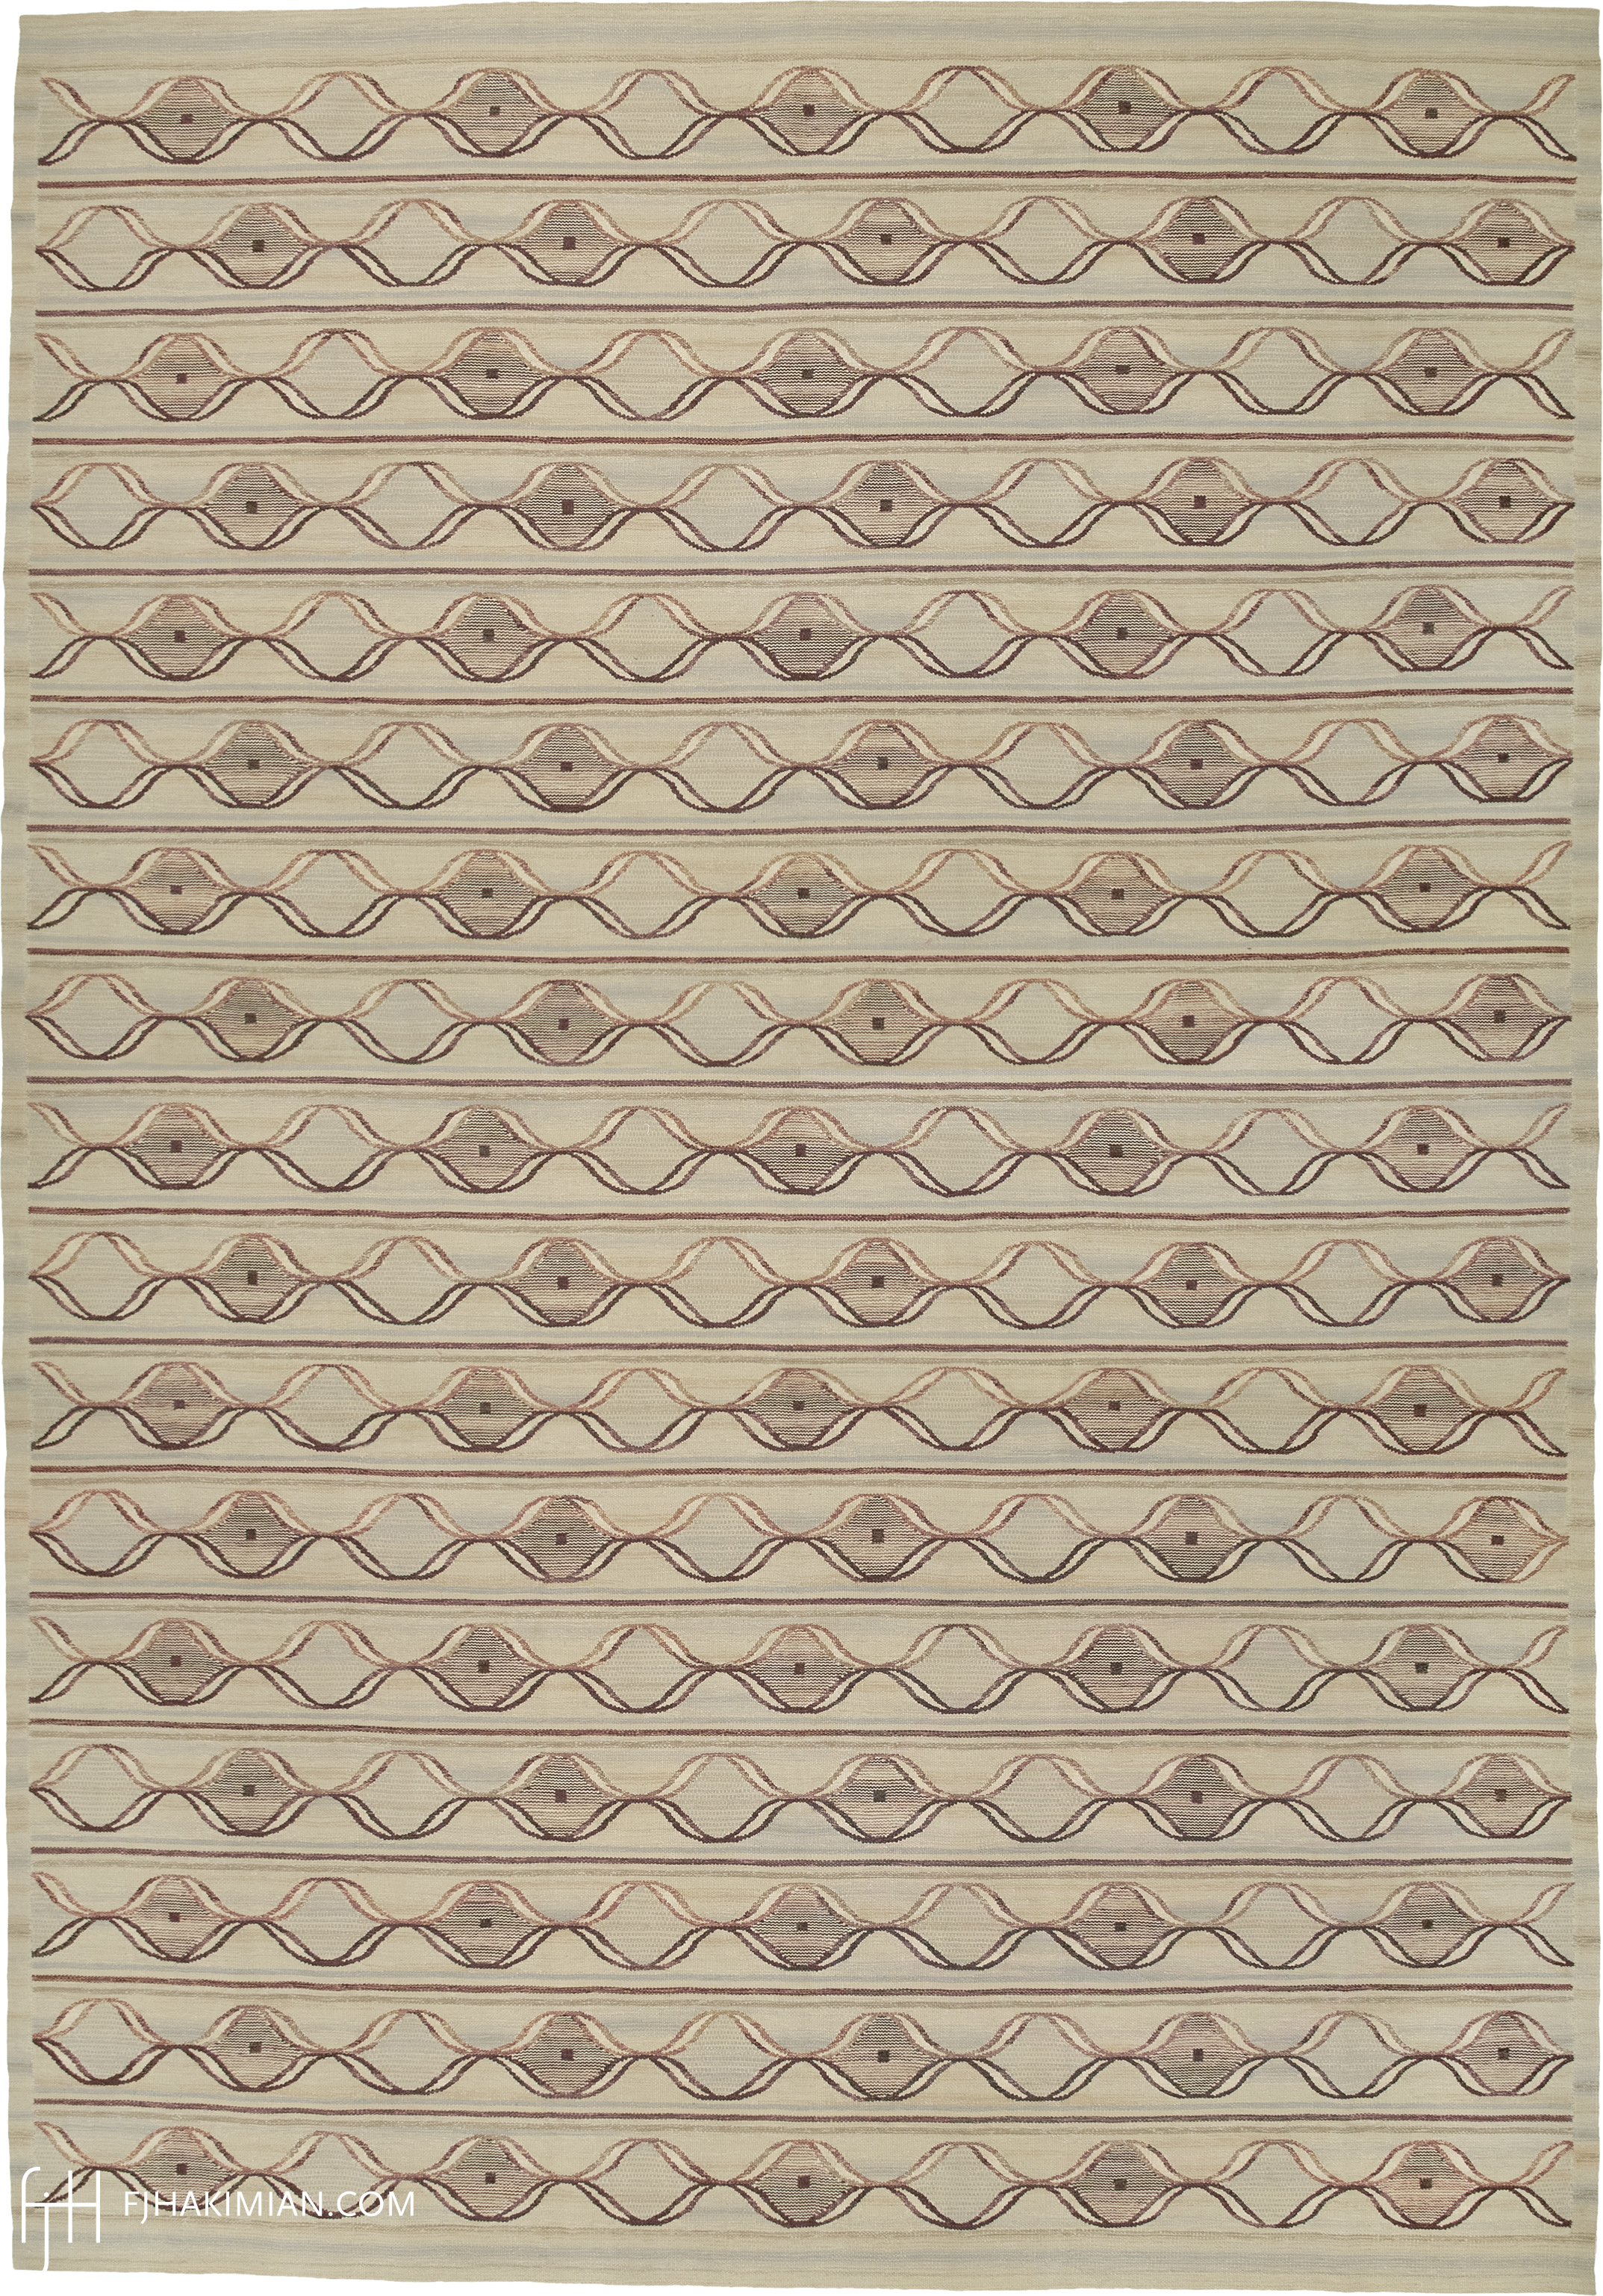 Clam Design | Custom Collection | FJ Hakimian | Carpet Gallery in NYC